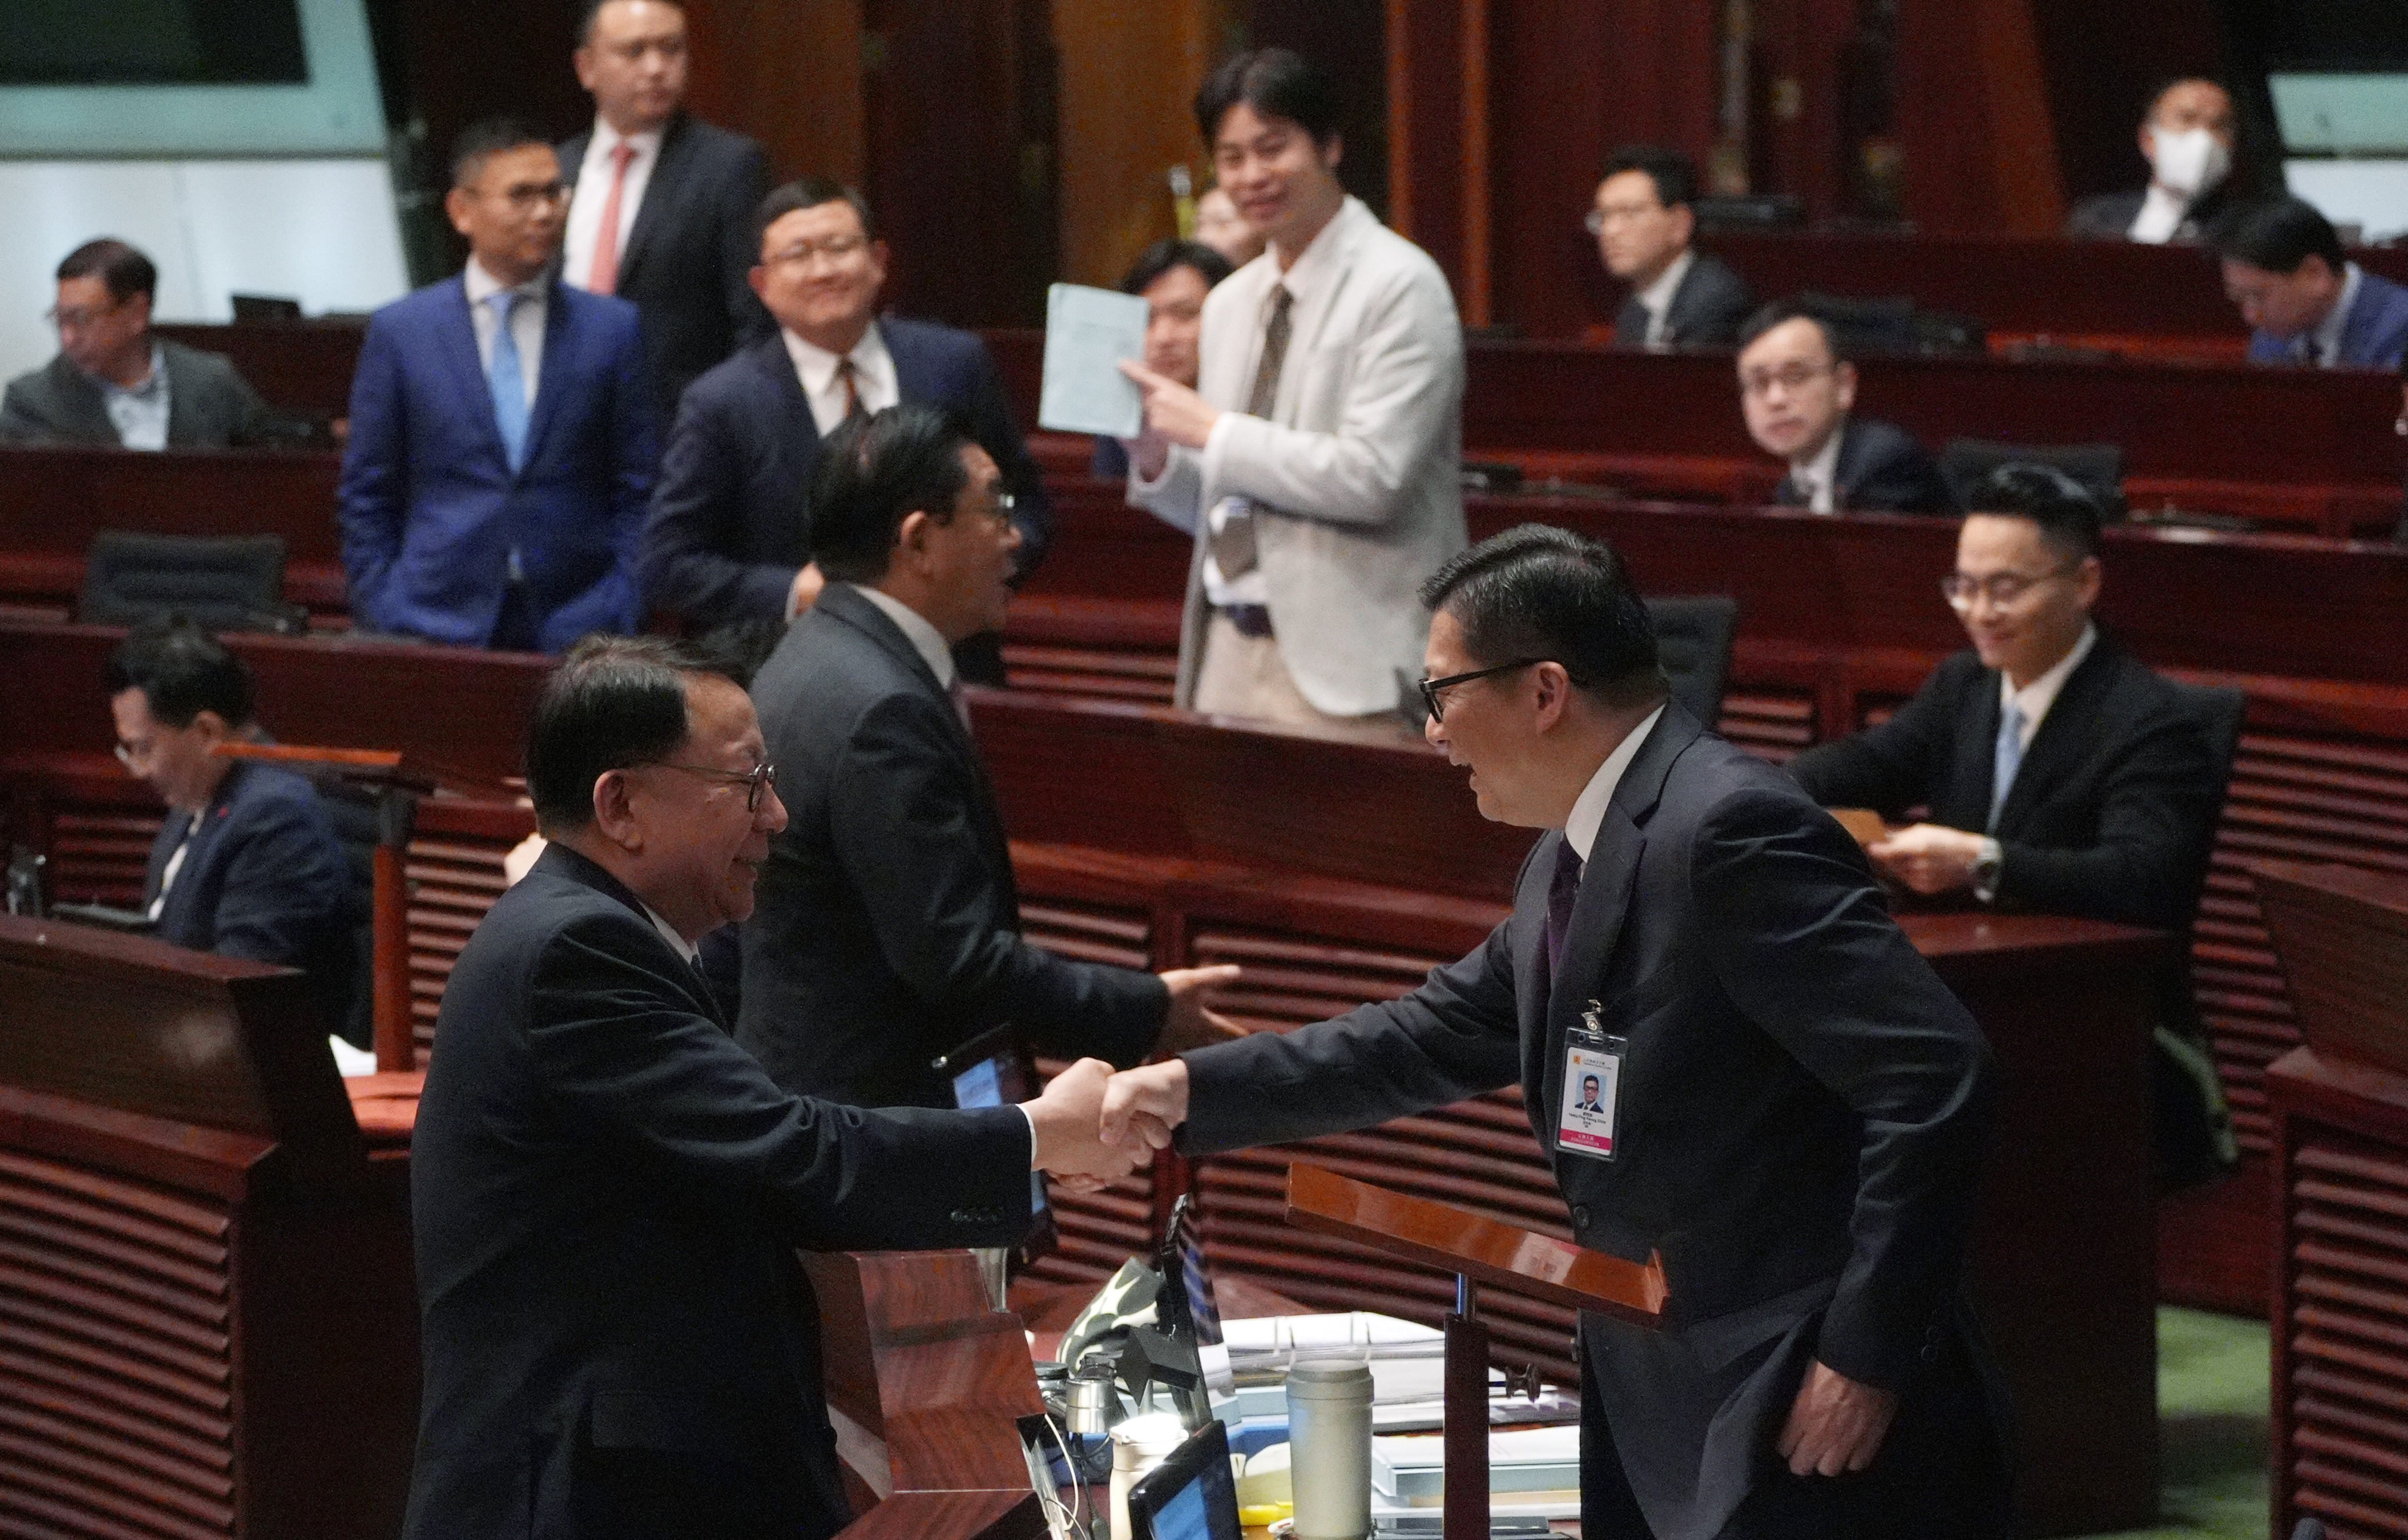 Chief Secretary for Administration Eric Chan Kwok-ki (L) shakes hand with Secretary for Justice Chris Tang Ping-kwung after  Basic Law Article 23 legislation at Legislative Council is passed. Photo: Eugene Lee